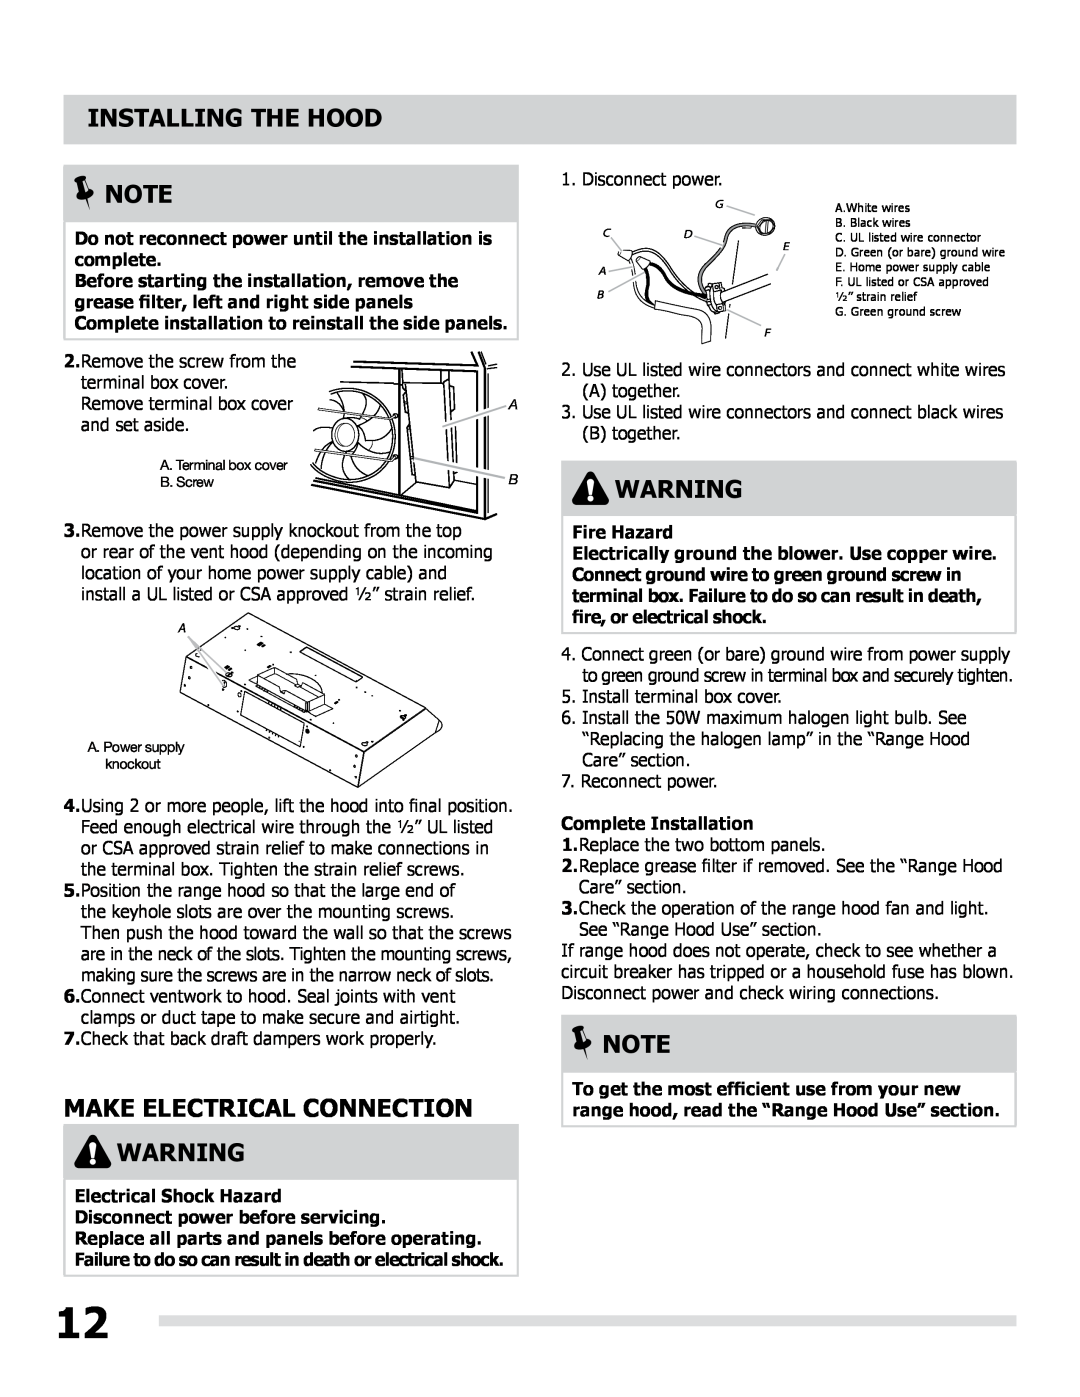 Frigidaire LI30MB manual Make Electrical Connection, Do not reconnect power until the installation is complete, Fire Hazard 